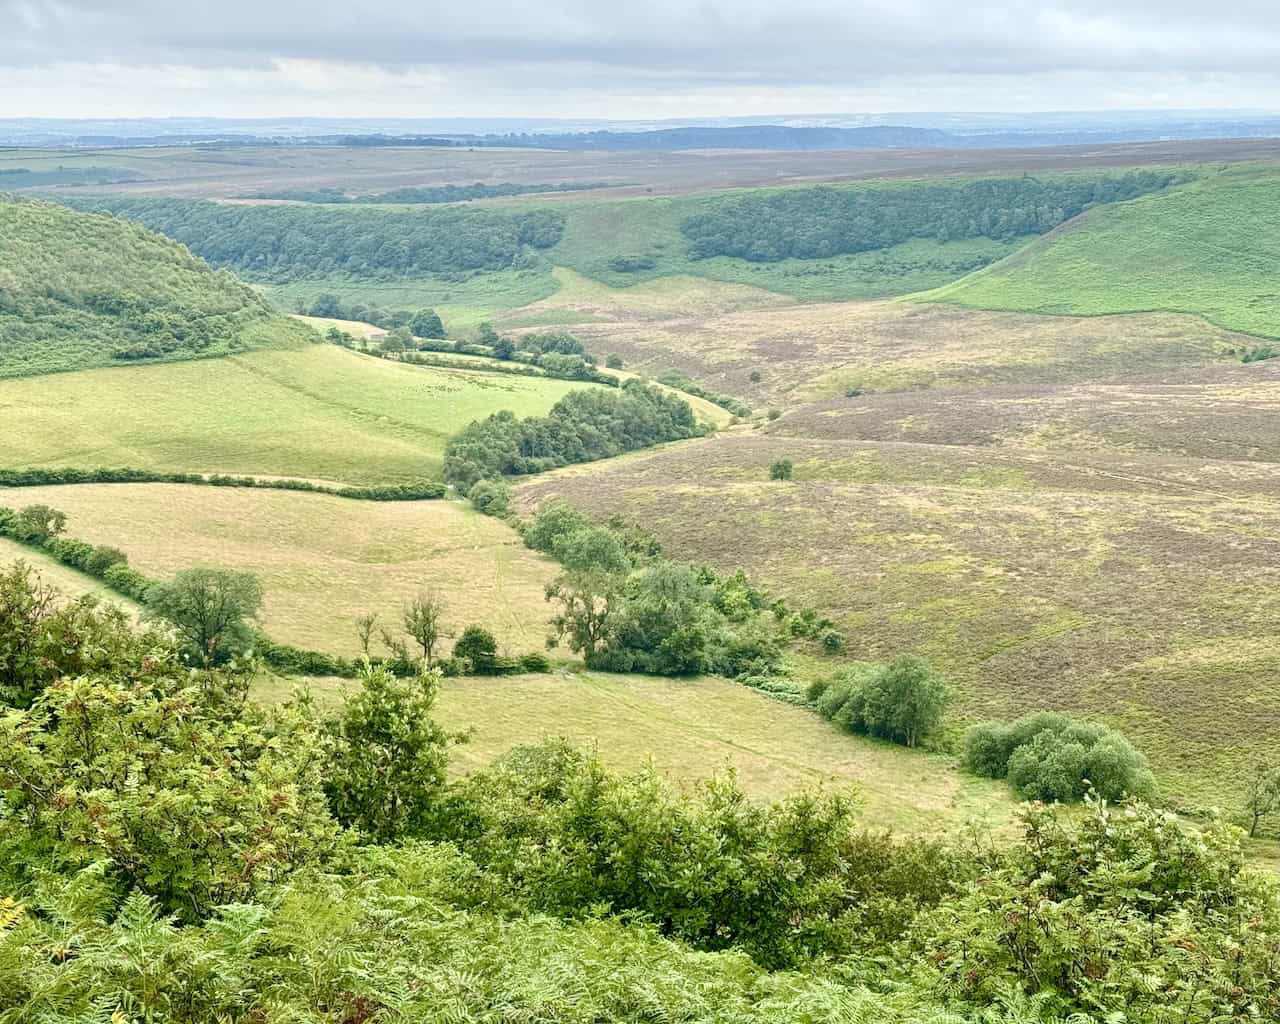 Spectacular views down into the vast natural basin almost immediately after leaving the car park at the start of my Hole of Horcum circular walk.